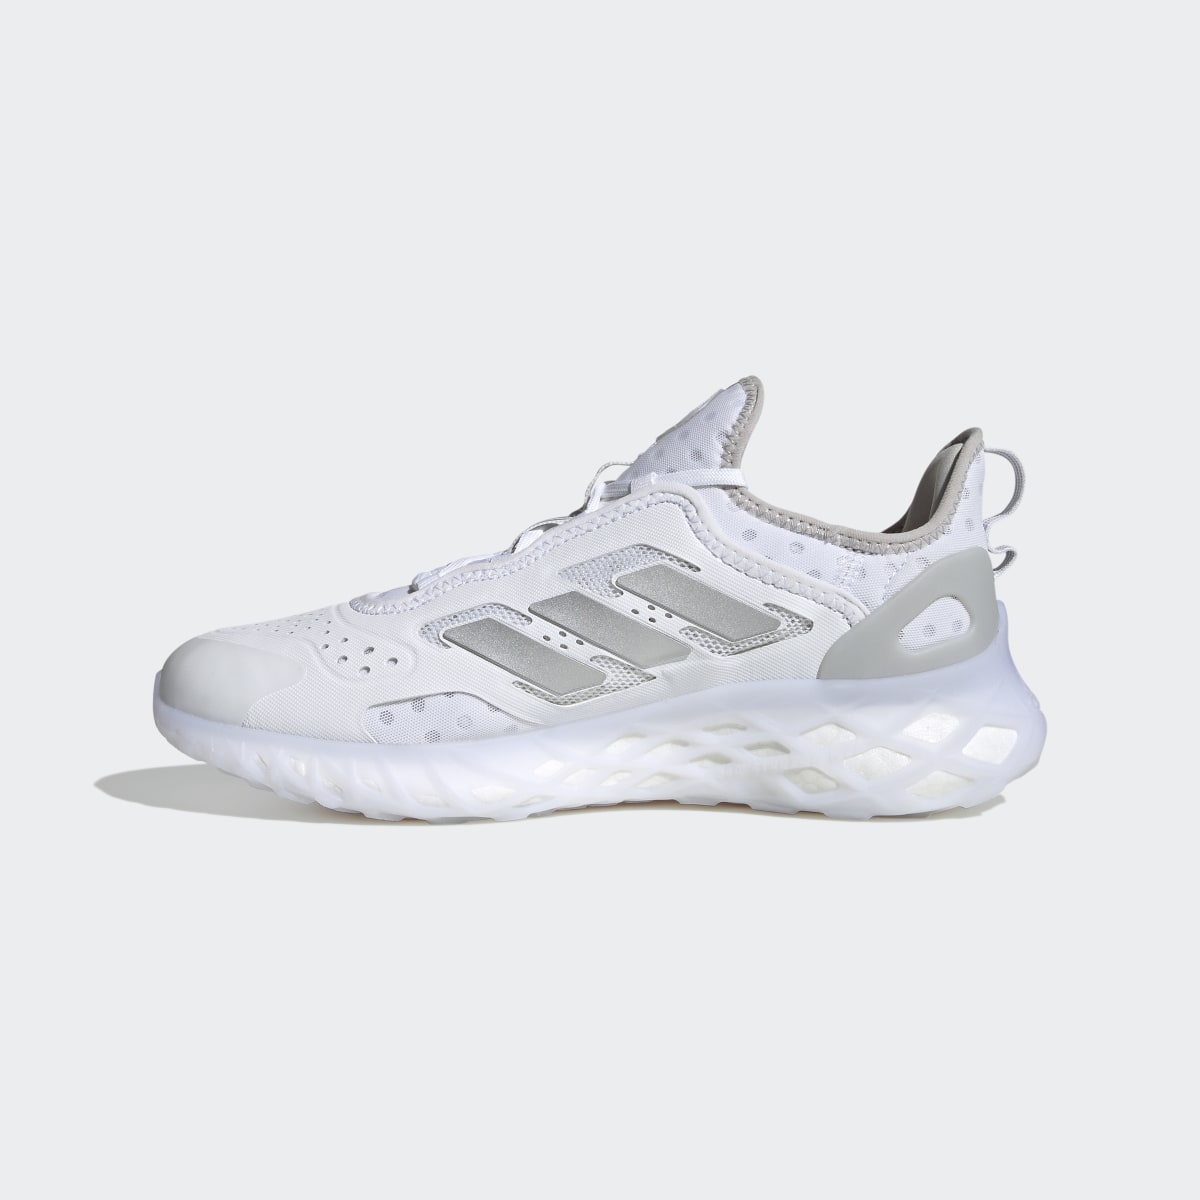 Adidas Web Boost Shoes. 7